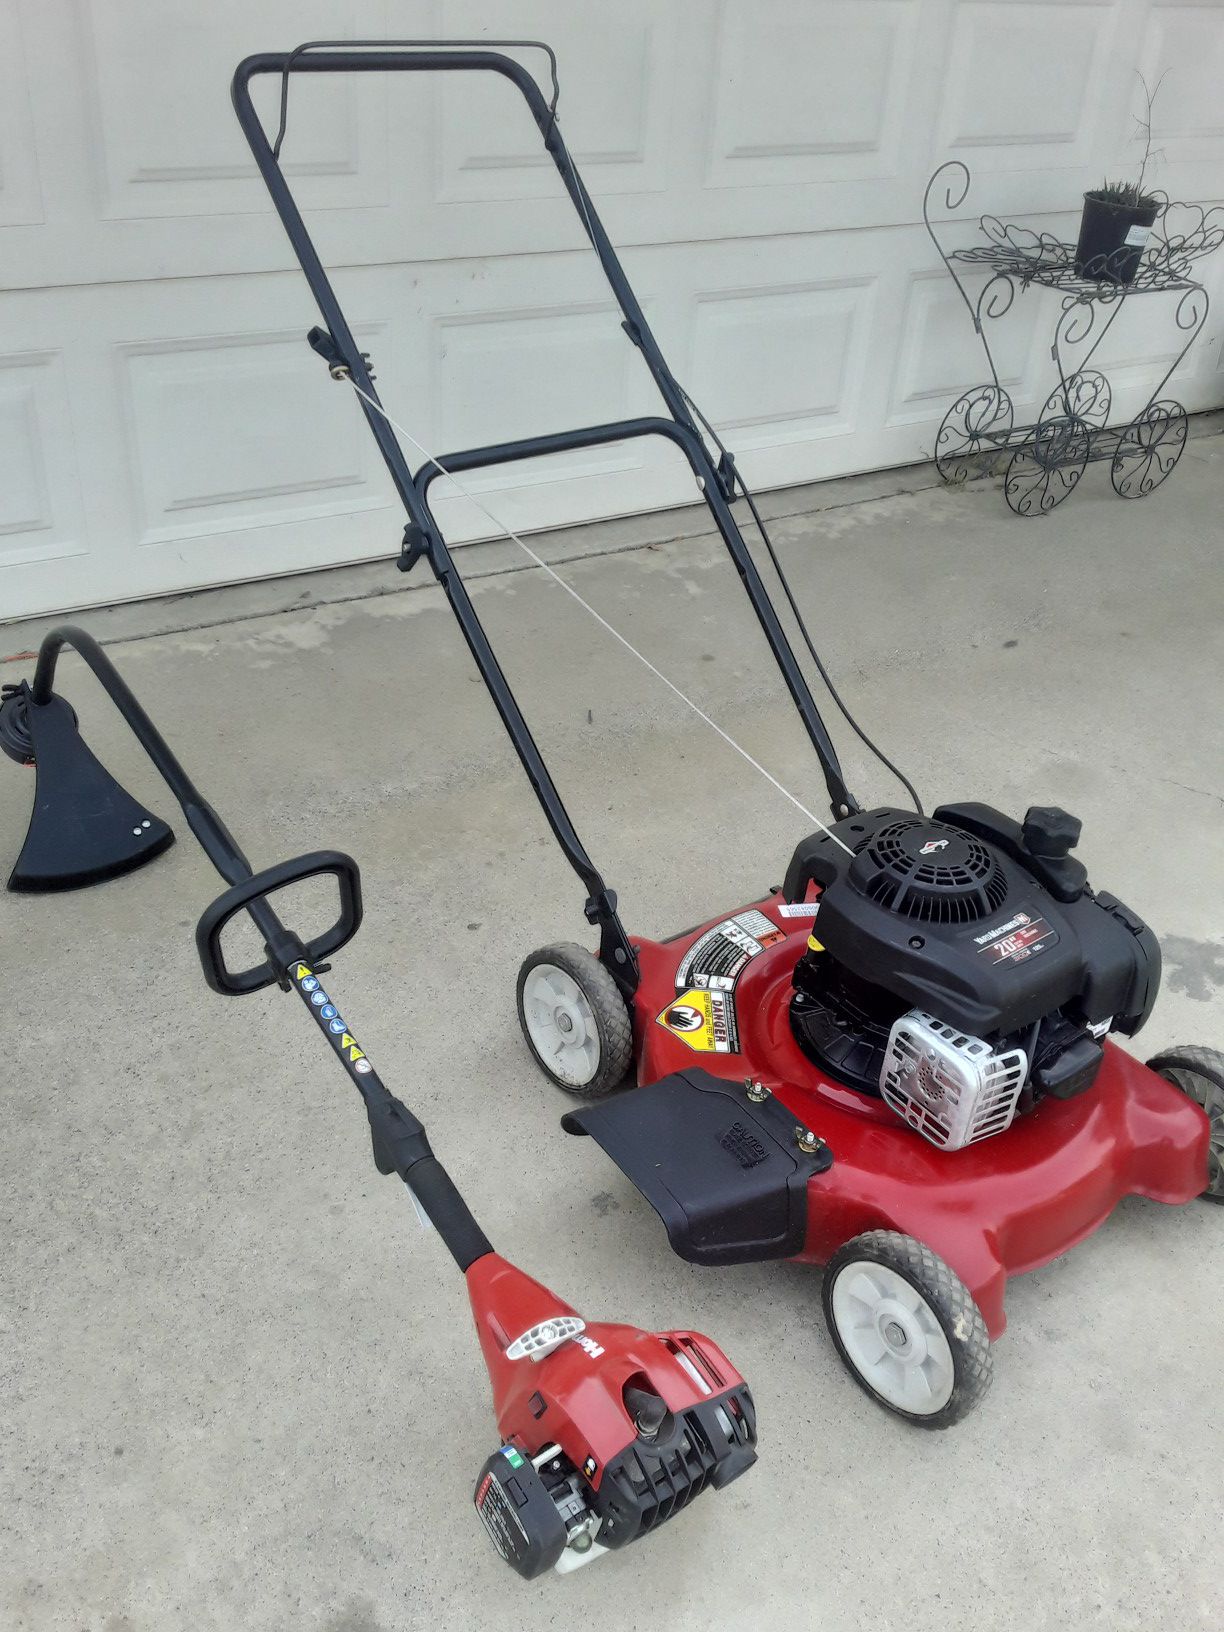 Gas weed eater and lawn mower